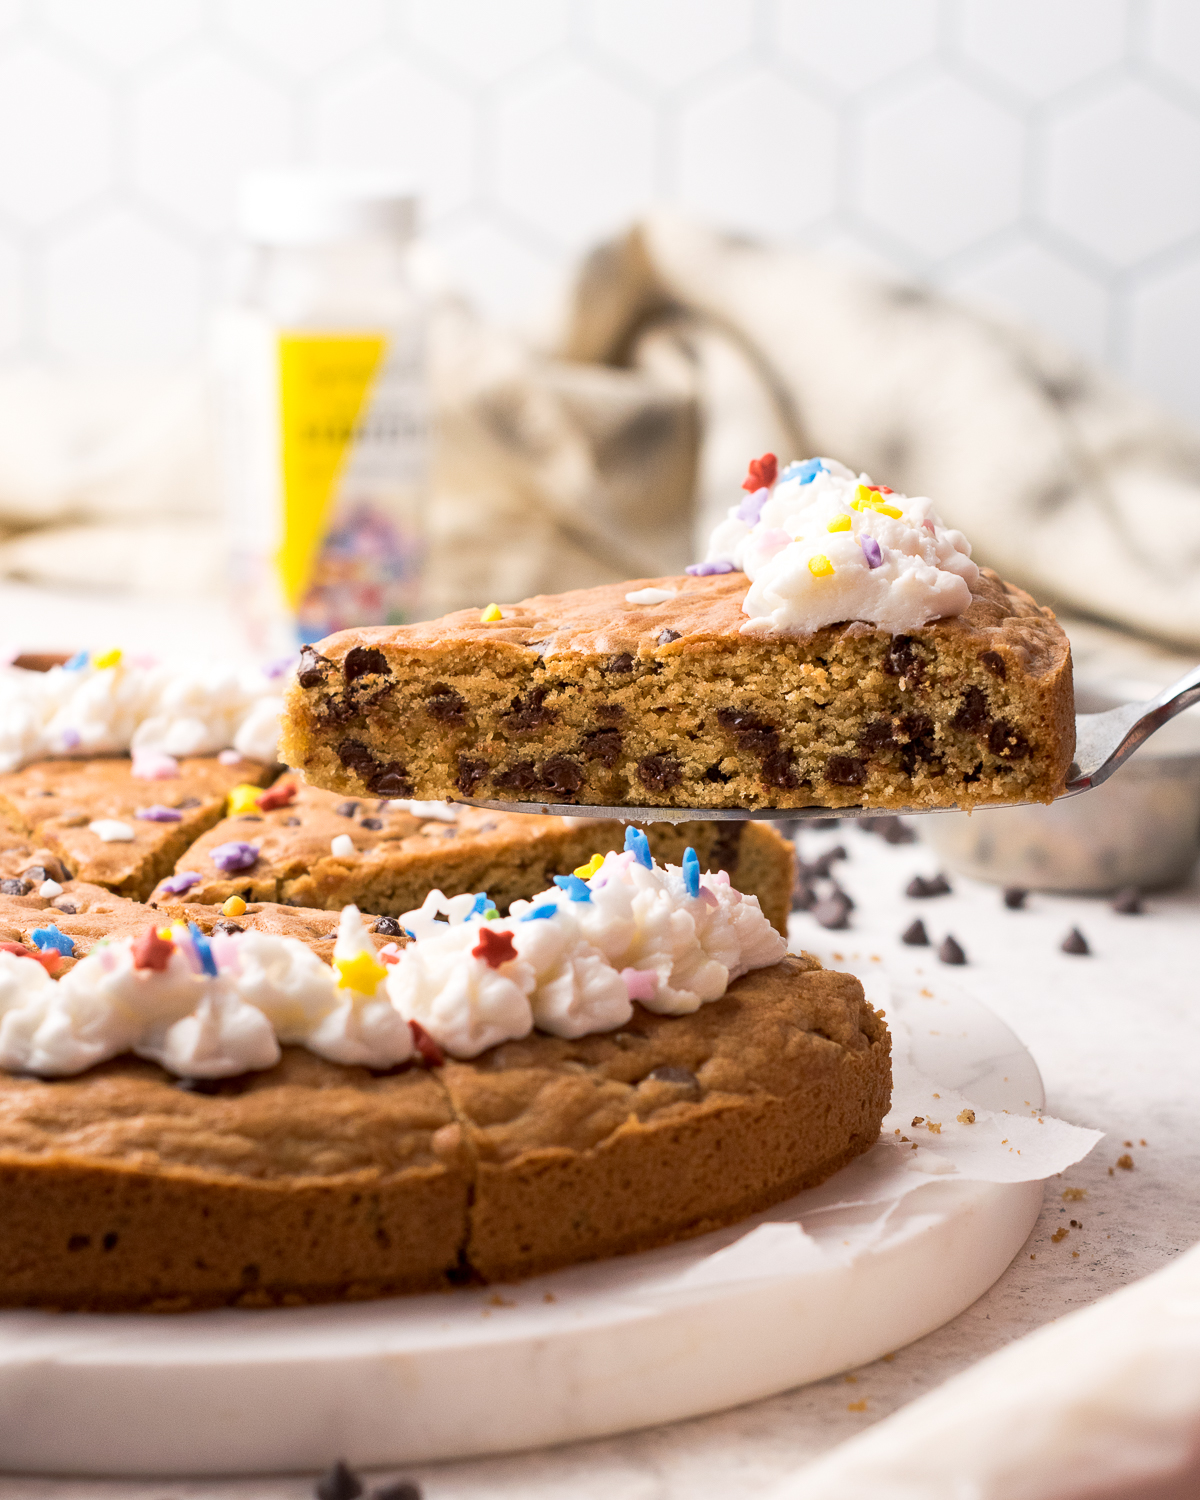 A slice of gluten free cookie cake being served.